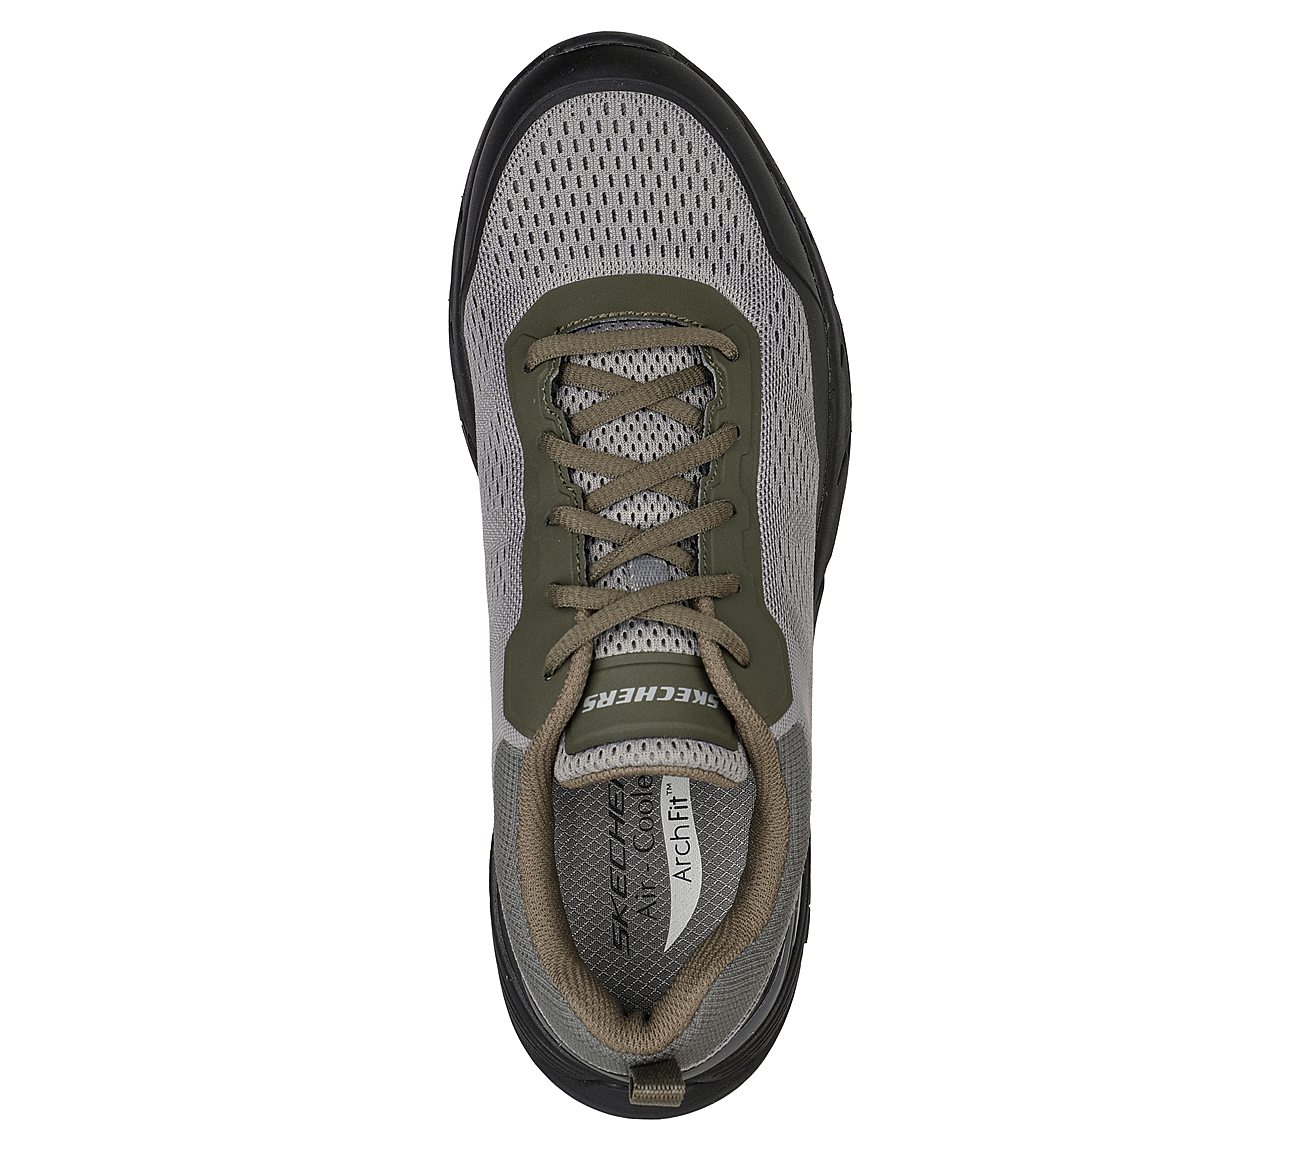 ARCH FIT BAXTER - PENDROY, GREY/BLACK Footwear Top View